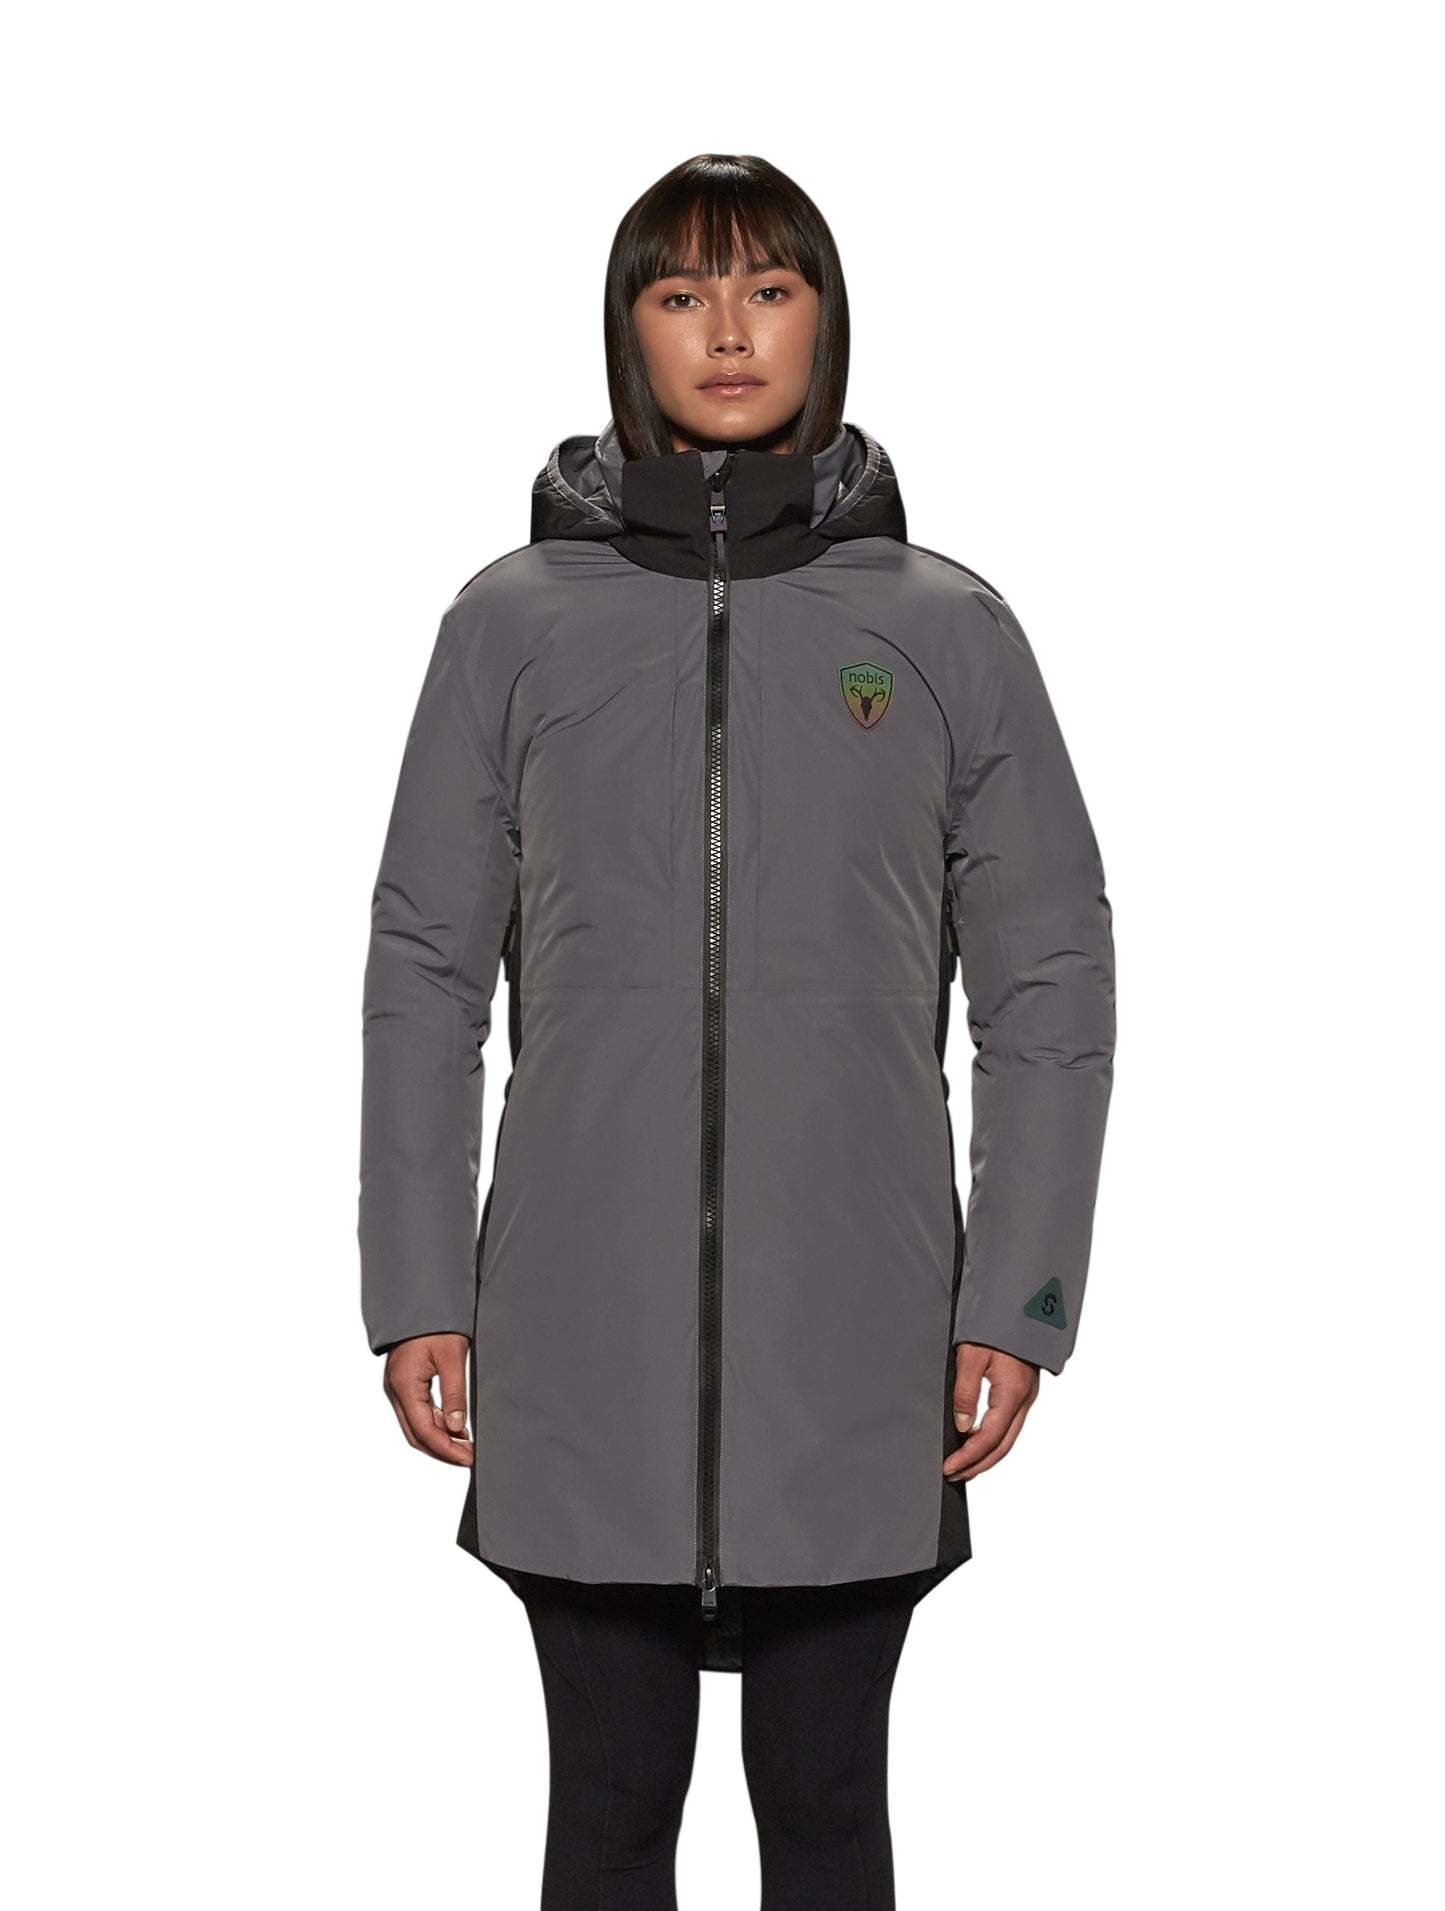 Unisex thigh length down parka with a contrast colour back panel, hidable waterproof hood, and hidden zipper pockets at chest and waist, in Concrete/Black